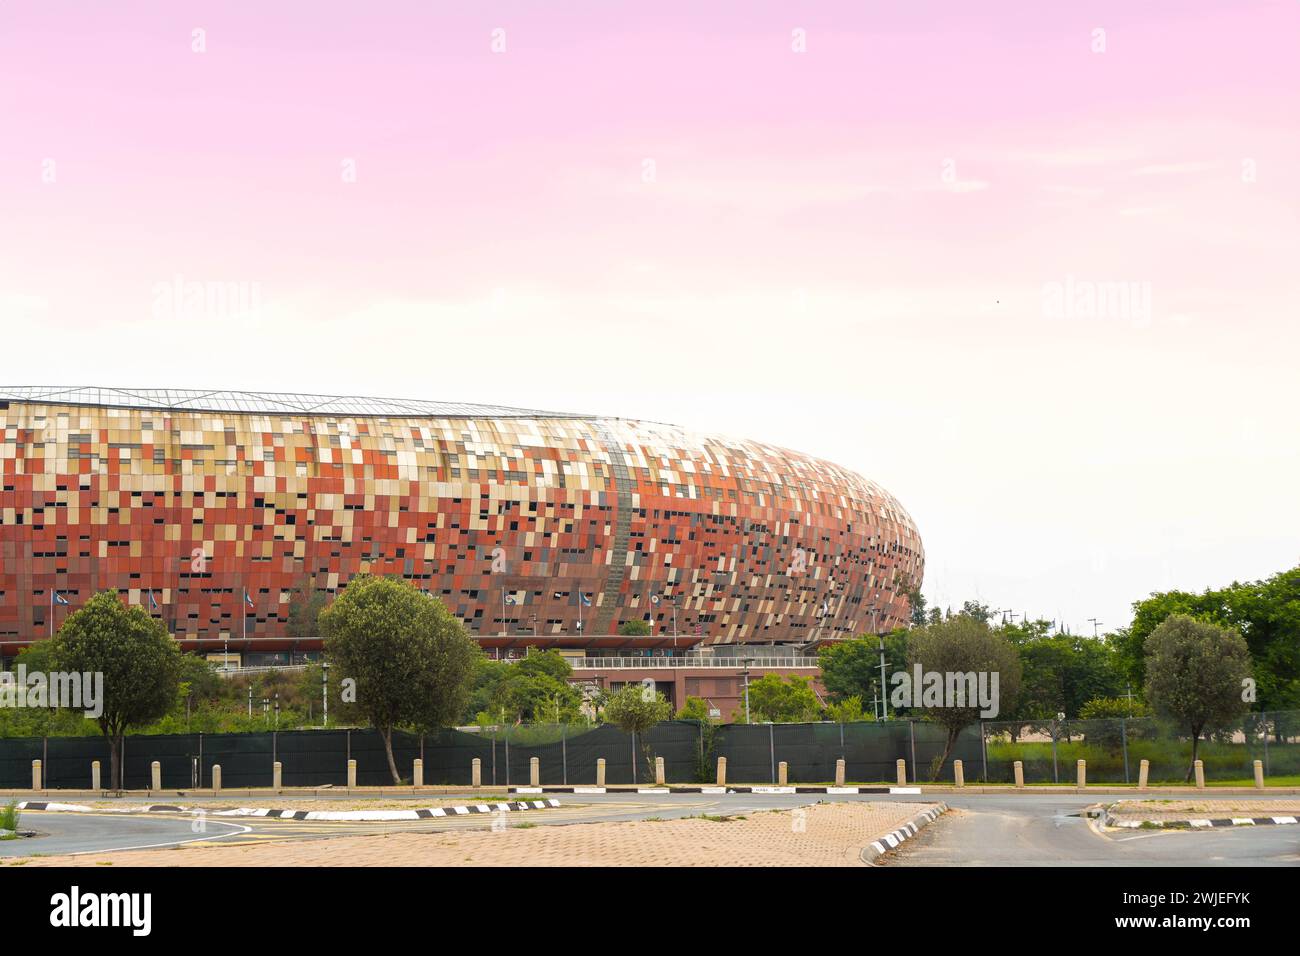 The iconic Soccer City Stadium in Johannesburg basks in the warm glow of a sunset, showcasing its distinctive mosaic facade against the evening sky. Stock Photo